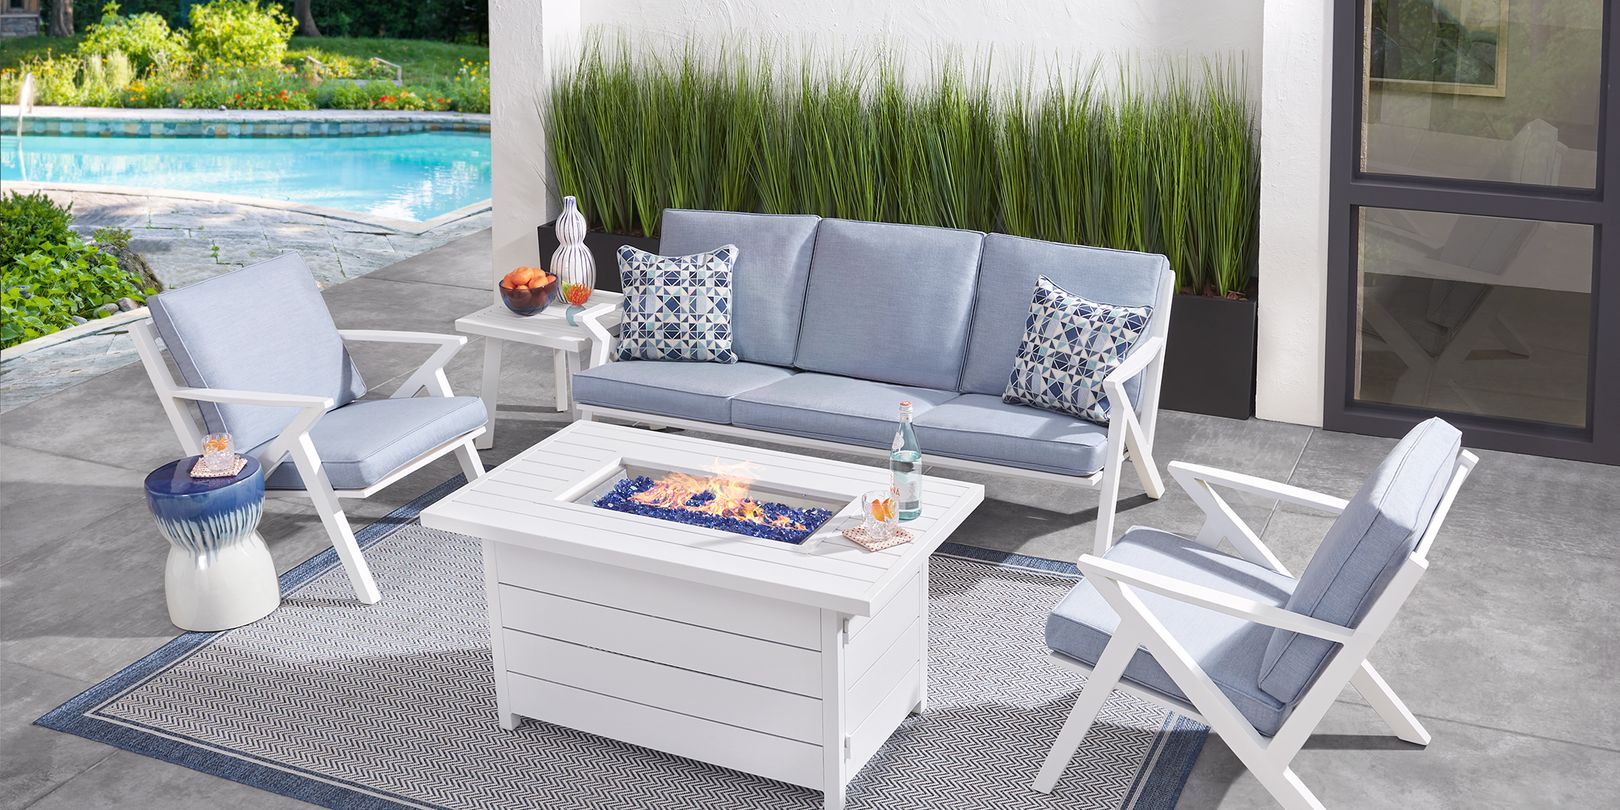 Photo of white wood patio seating set and white fire table